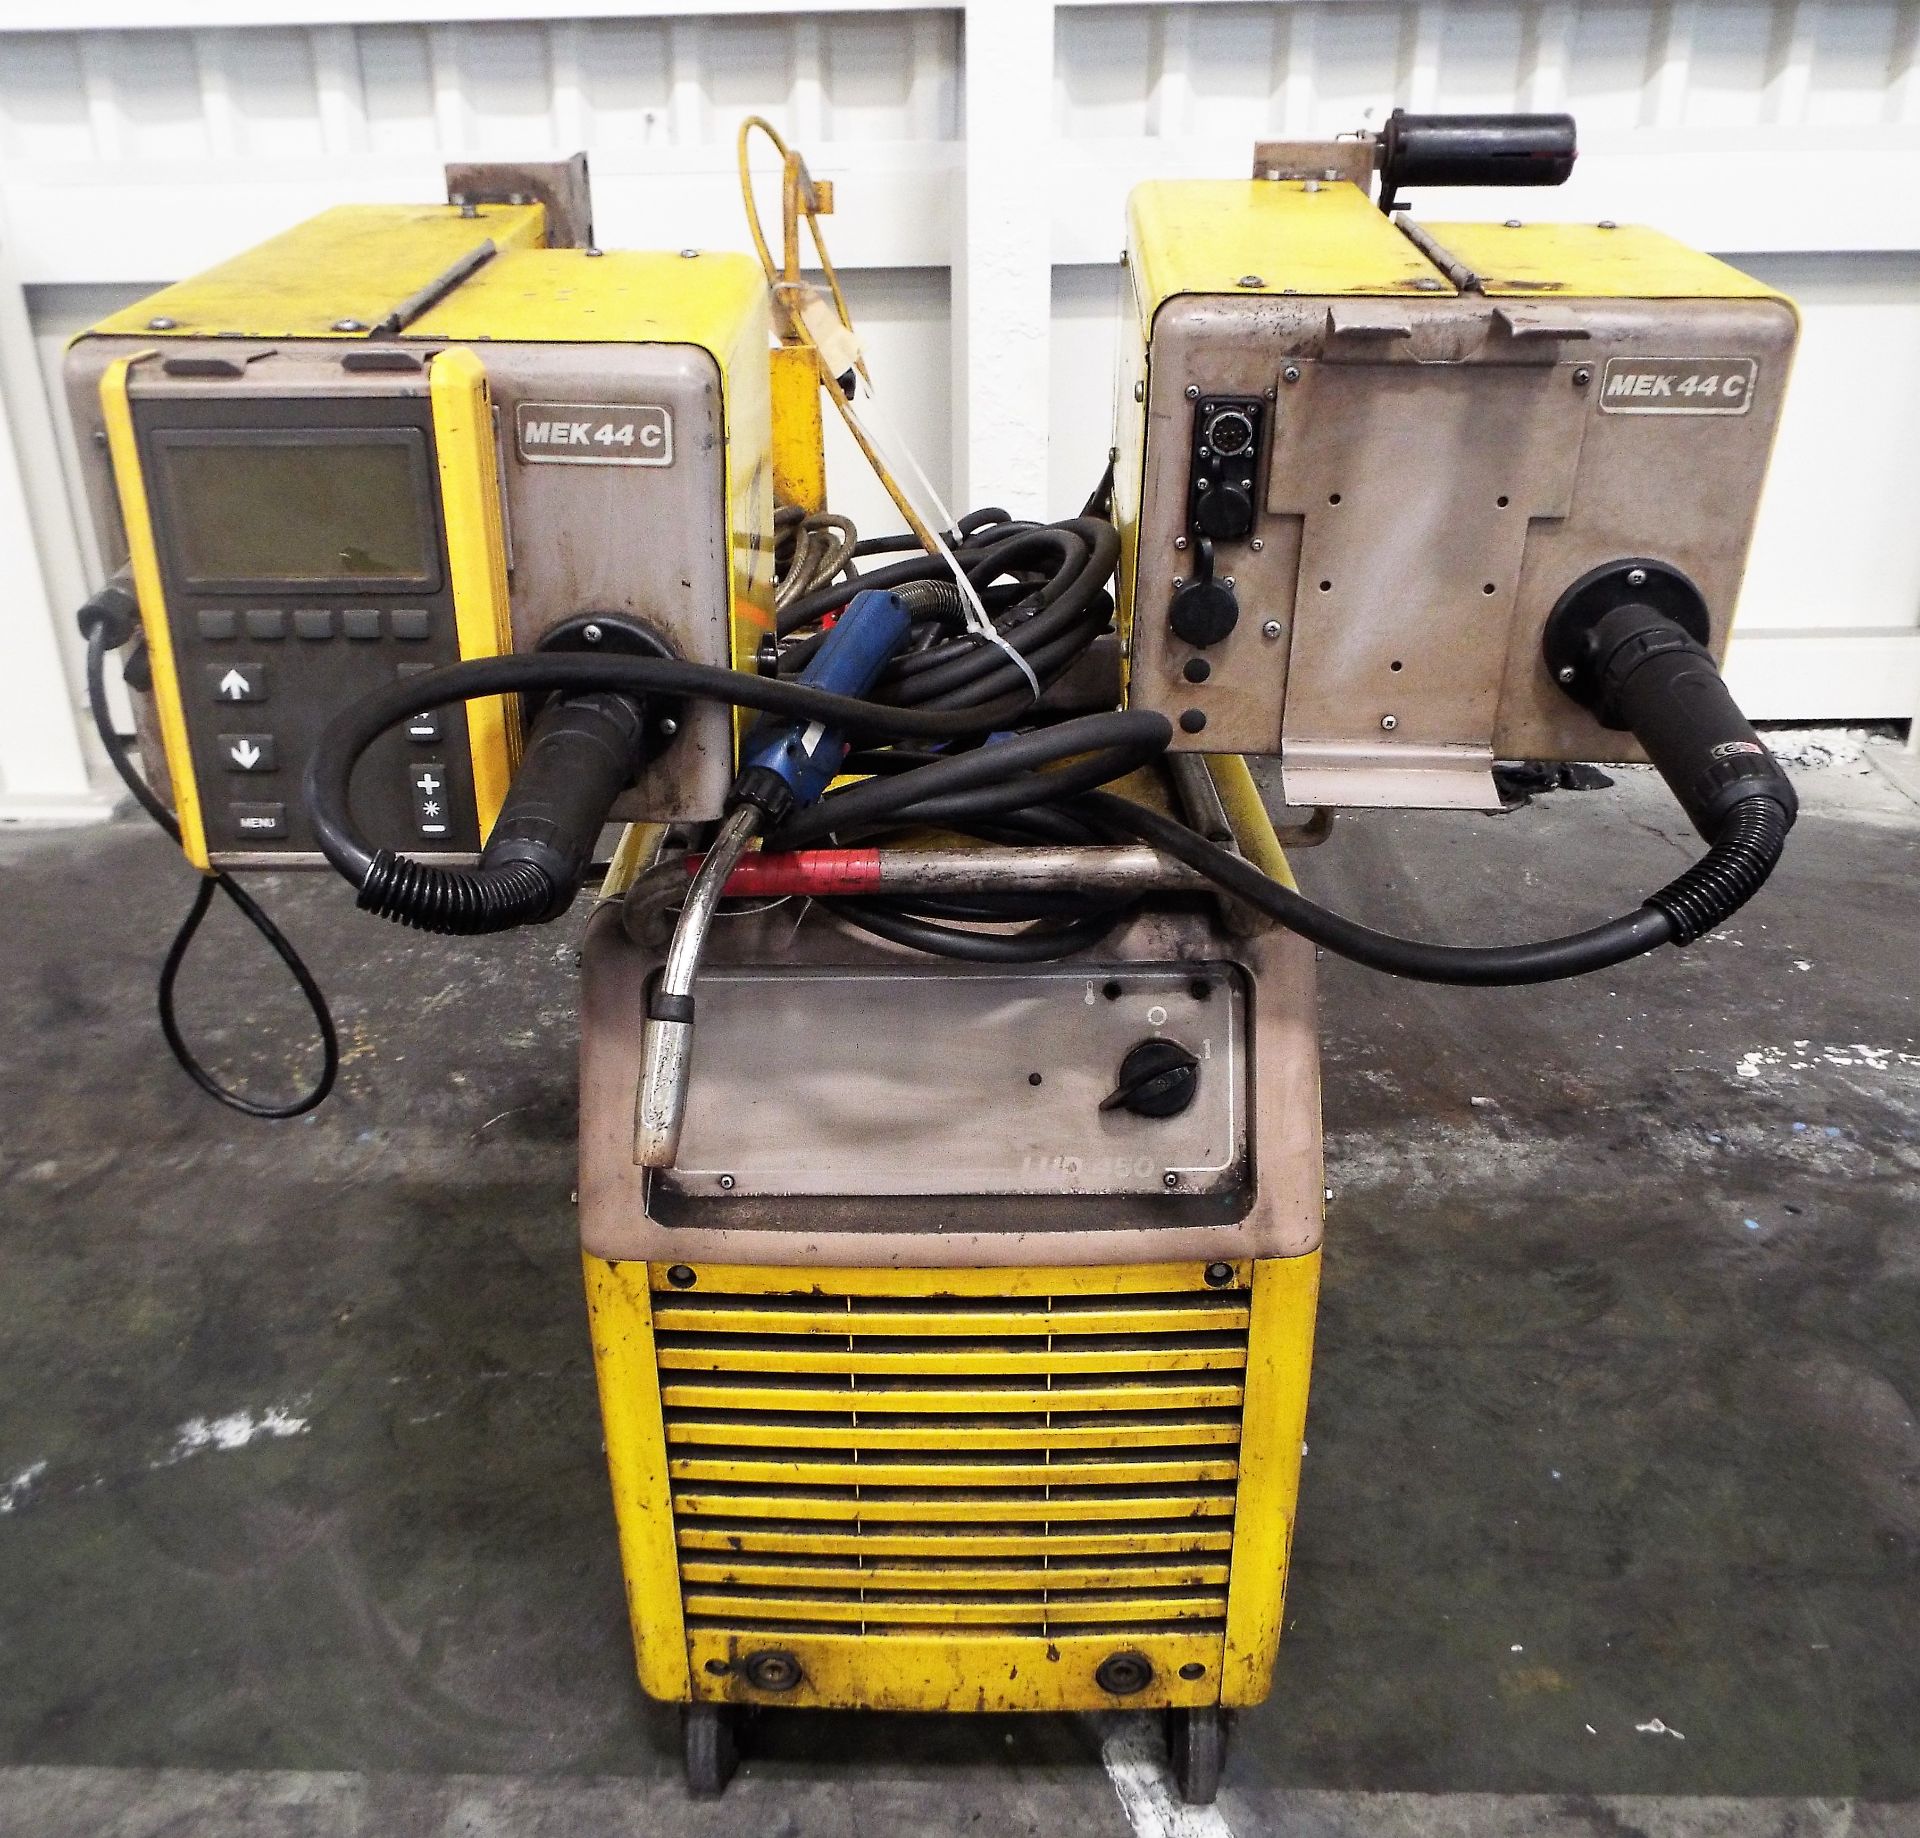 Esab Aristo LUD 450 Portable Welding Set, with dual station MEK 44C Wire Feeds & PUA-1 Pendant. - Image 3 of 7